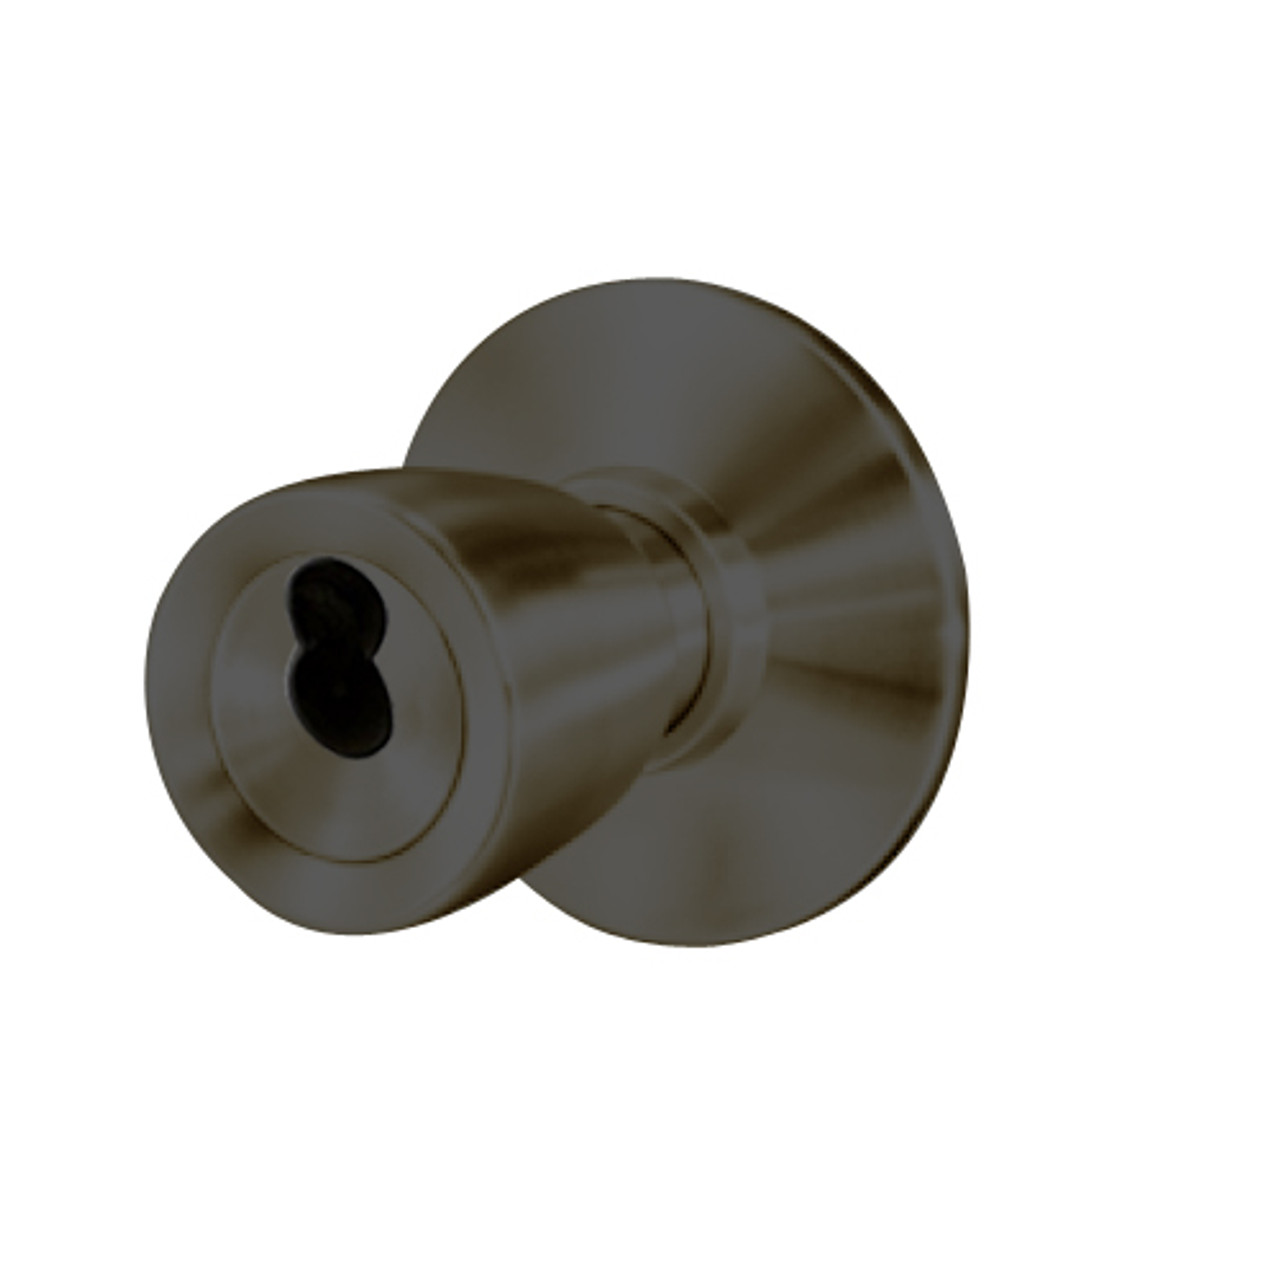 8K47YD6DSTK613 Best 8K Series Exit Heavy Duty Cylindrical Knob Locks with Tulip Style in Oil Rubbed Bronze